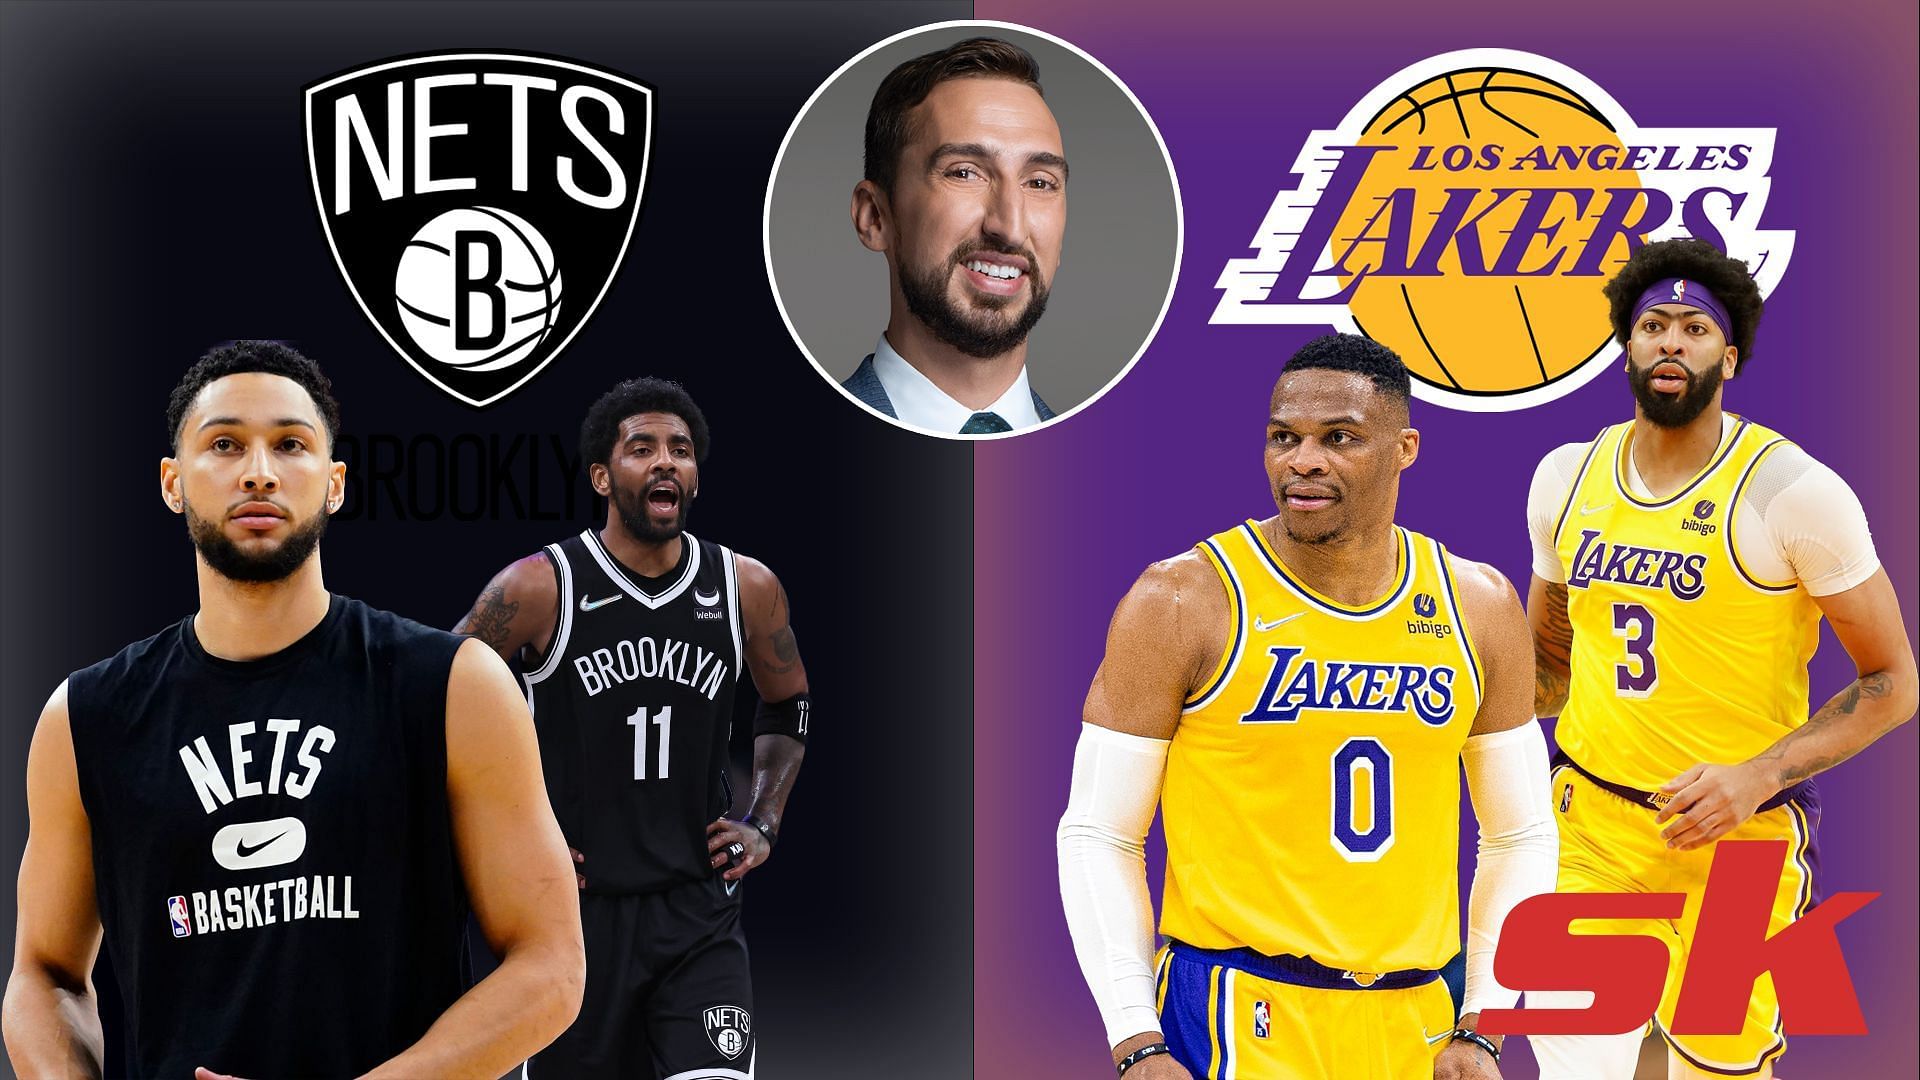 Nick Wright proposes a trade between the Brooklyn Nets and the LA Lakers.